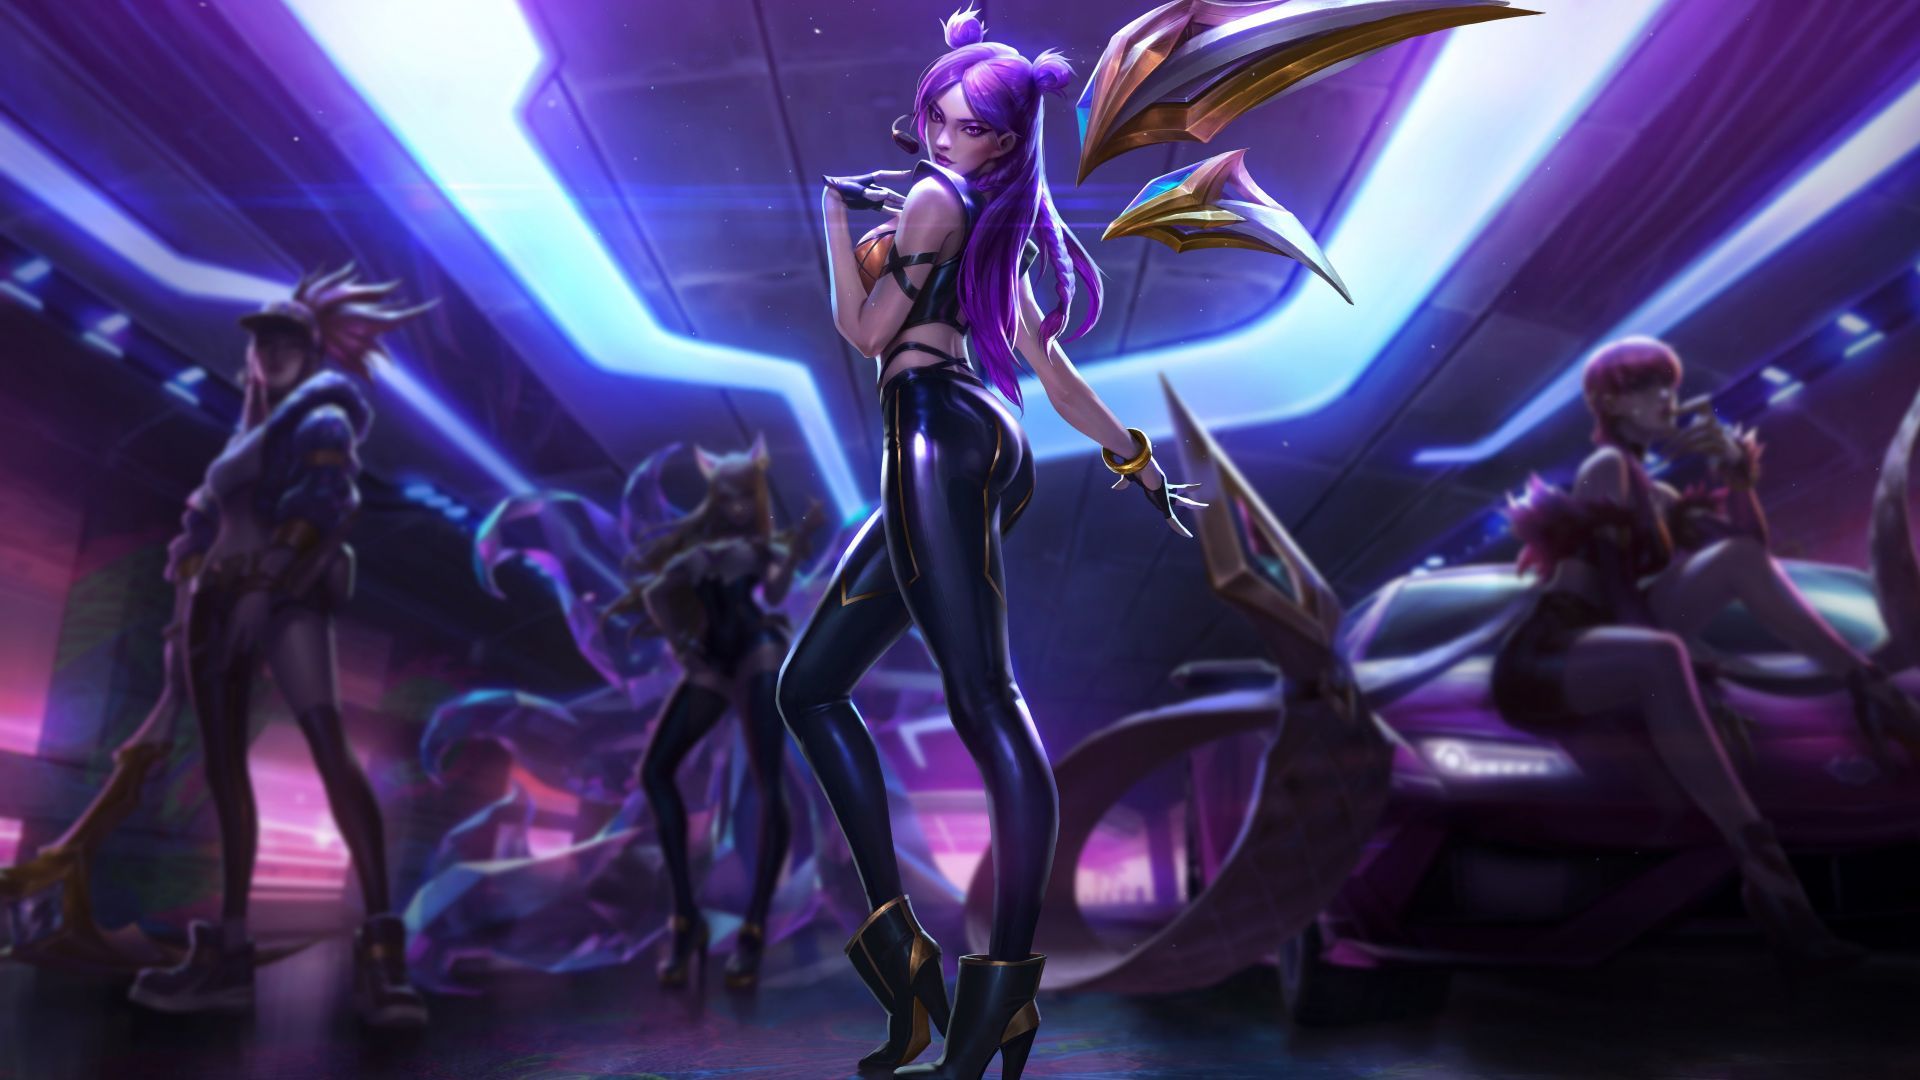 Desktop wallpaper hot, girl character, league of legends, kai'sa, HD image, picture, background, 4aec6a